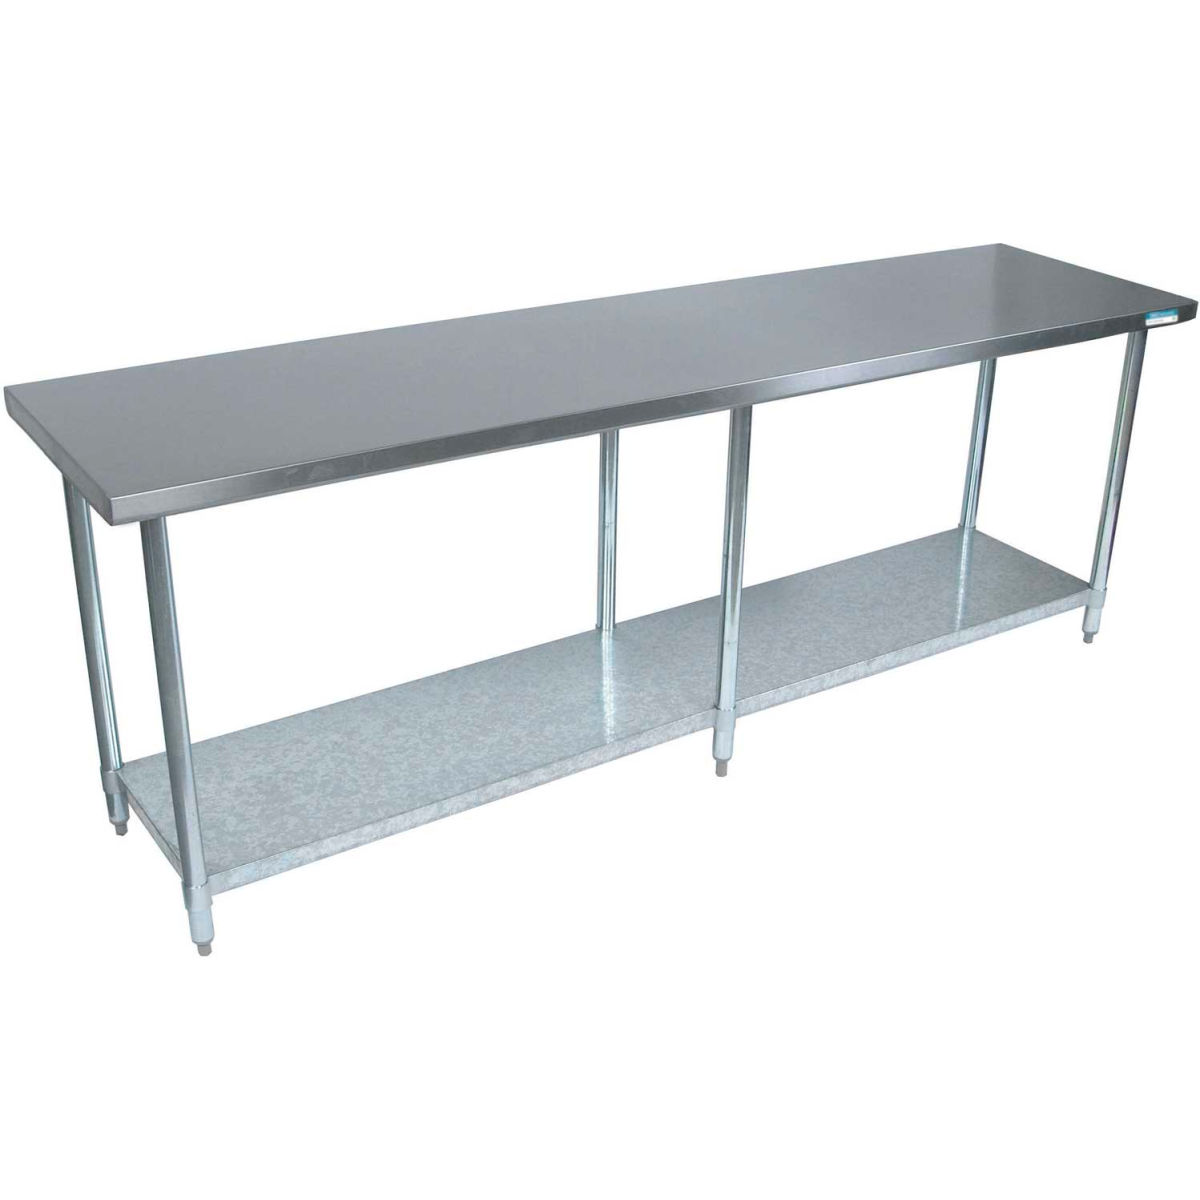 Picture of BK Resources B1516258 18 Gauge 430 Series Stainless Workbench with Undershelf - 84 x 18 in.